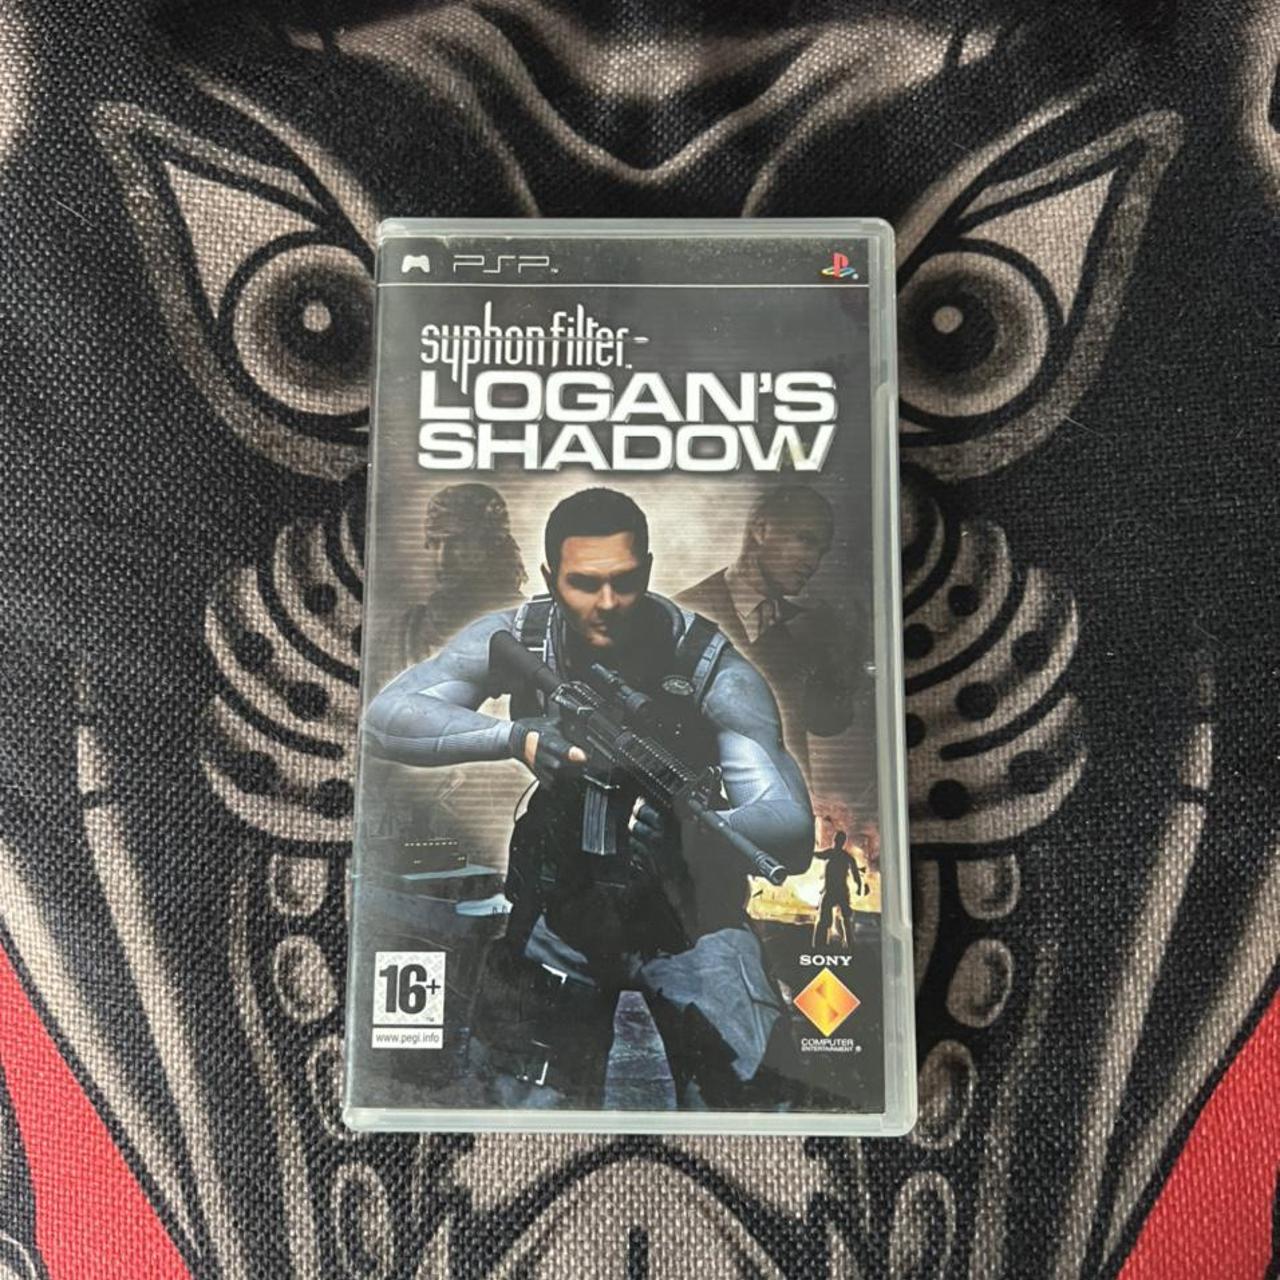 Product Image 1 - Logan’s shadow psp game with